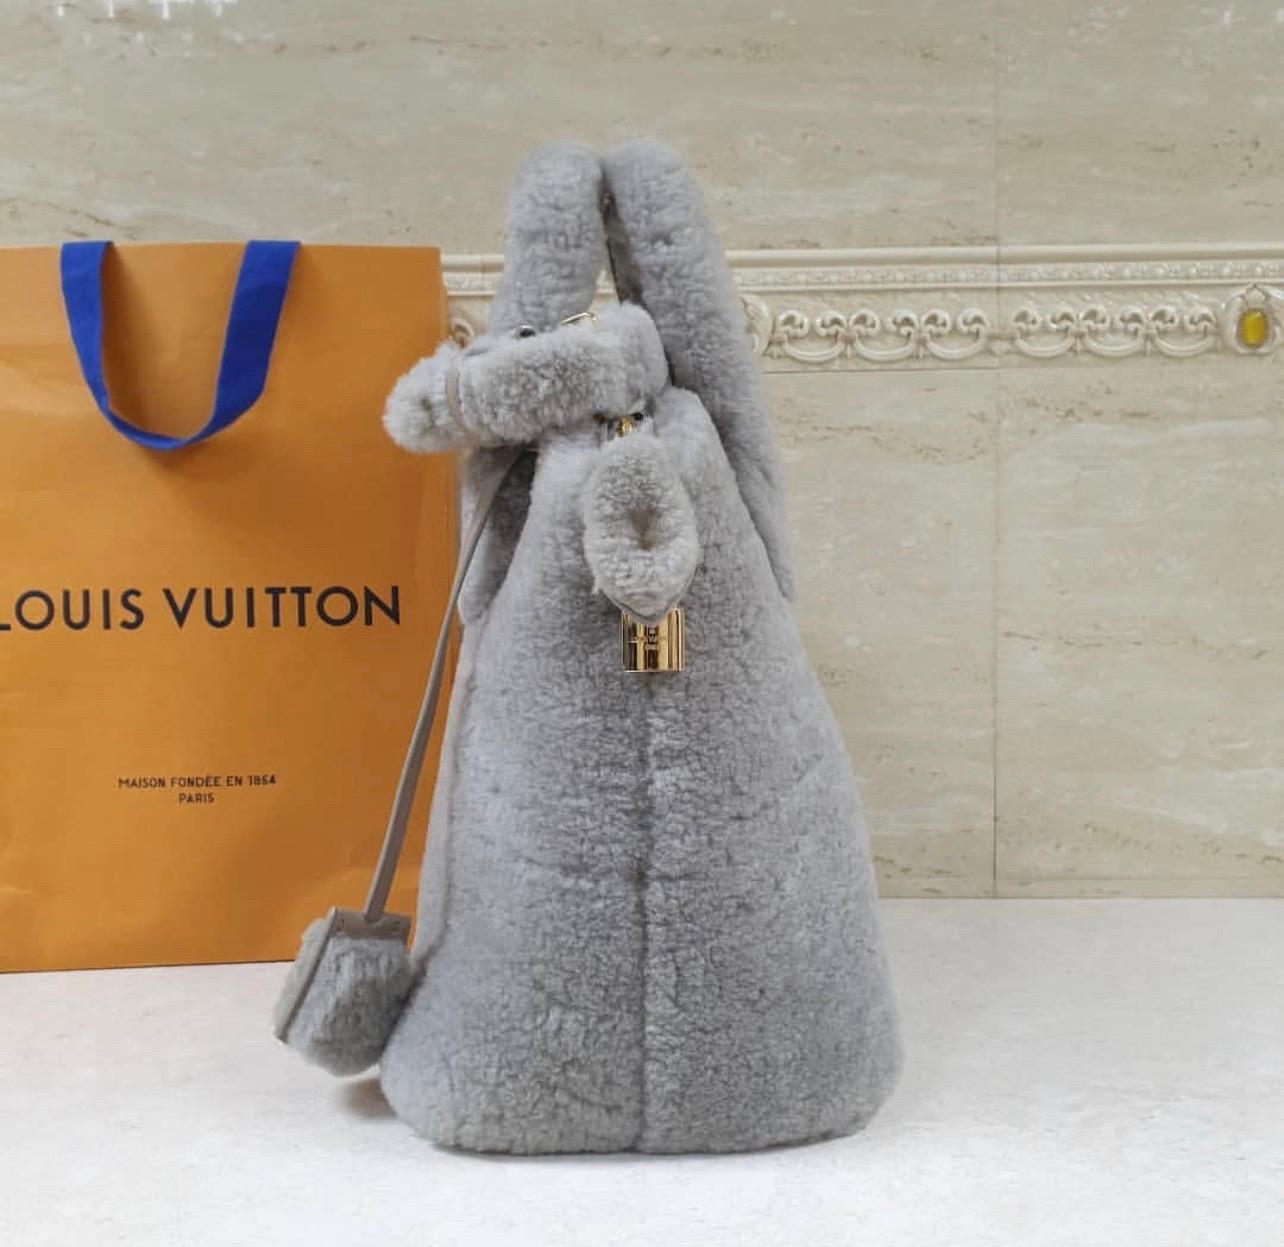 Louis Vuitton Shearling Pulsion Lockit Bag.
 From the fall/winter 2011 Collection.
 Grey Shearling with brass hardware, dual flat top handles, grey leather interior, single slit pocket at interior wall and zip closure at top. 
No box. No dust bag.